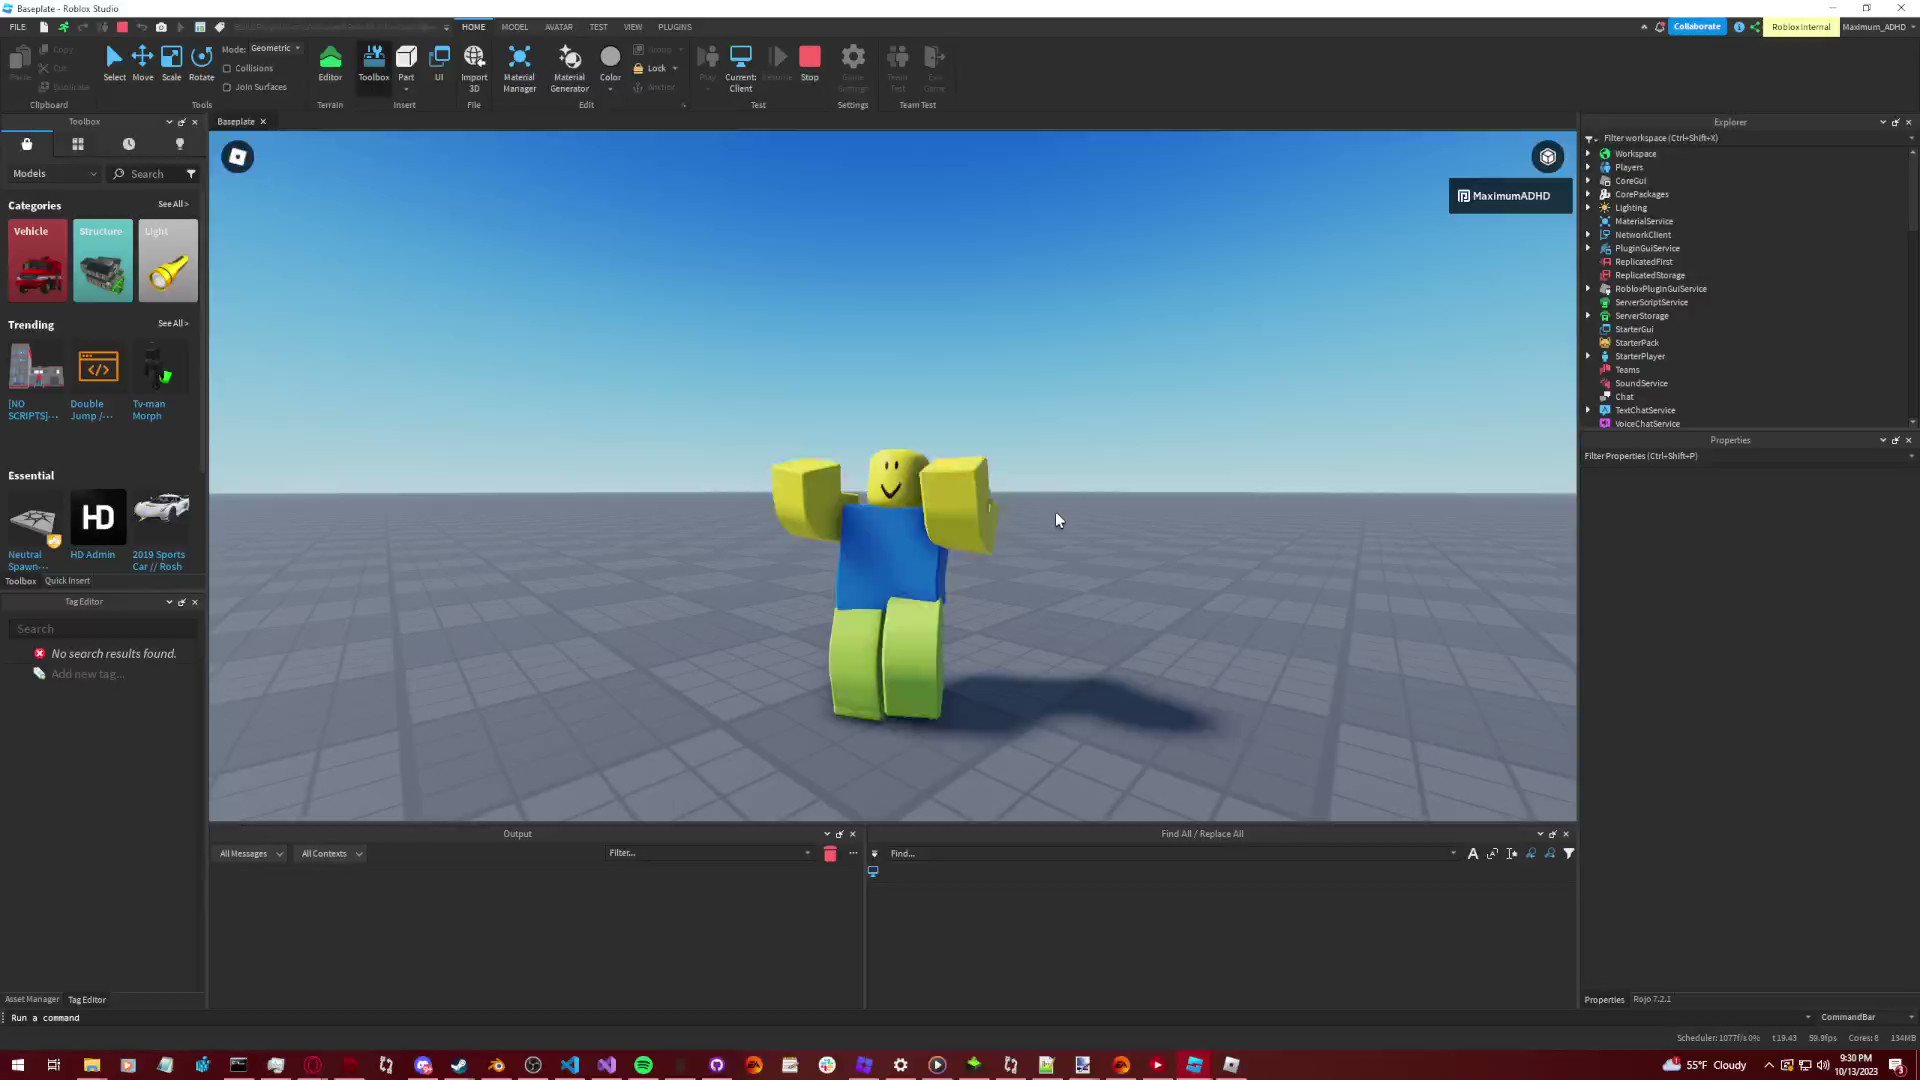 arthur on X: AI Skins for Roblox, launching in beta today 🪄 Powered by  @customuse3D, you can now create Roblox skins in seconds using only your  imagination Saves time for pros; gives